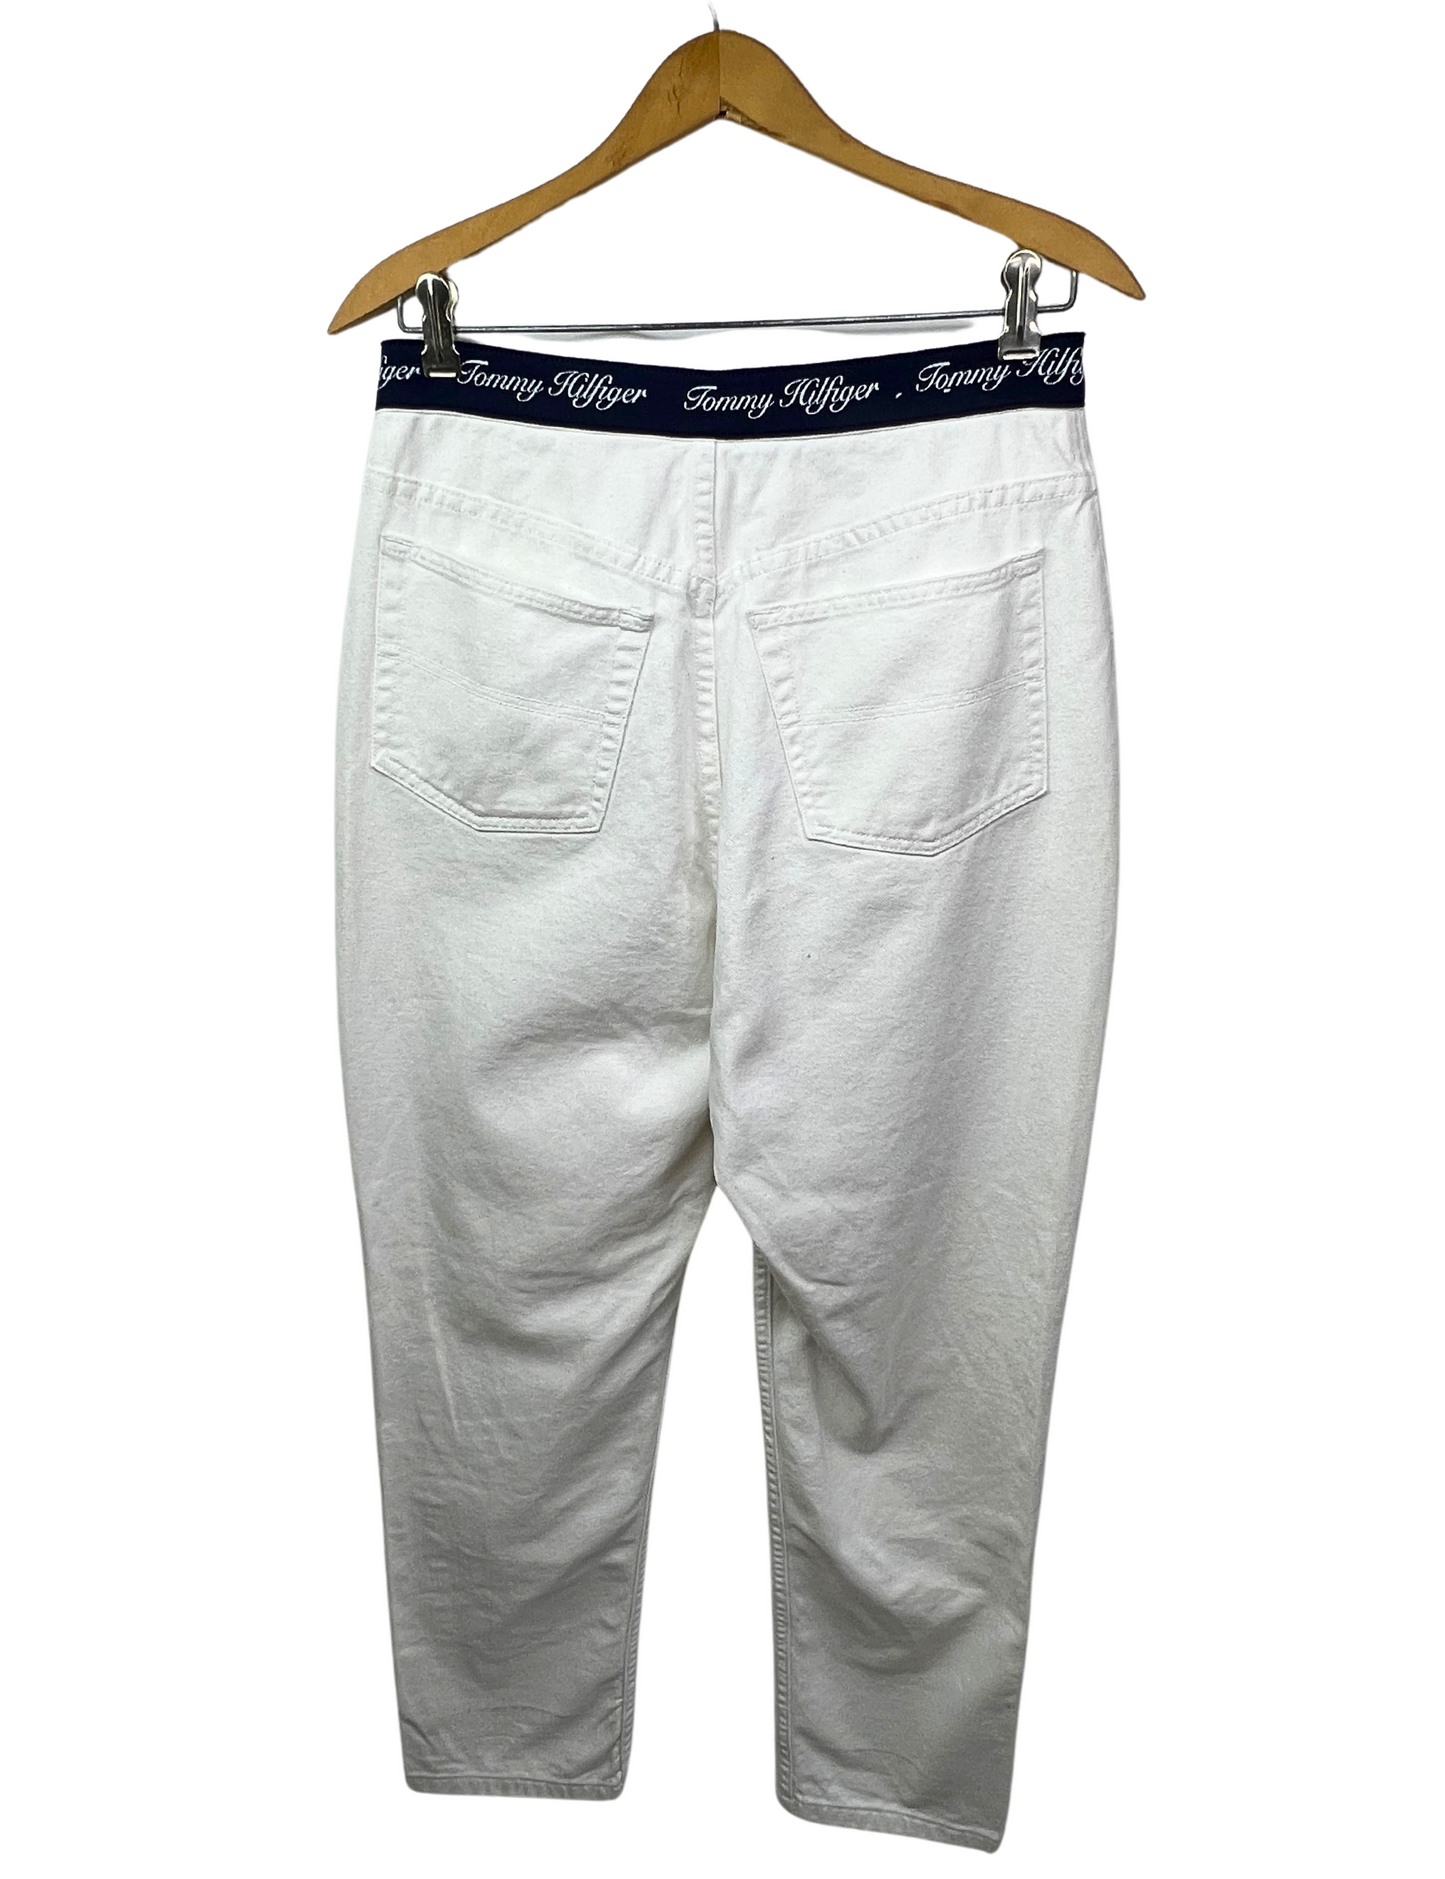 00’s Tommy Hilfiger Spellout Waistband White Jeans Size 12